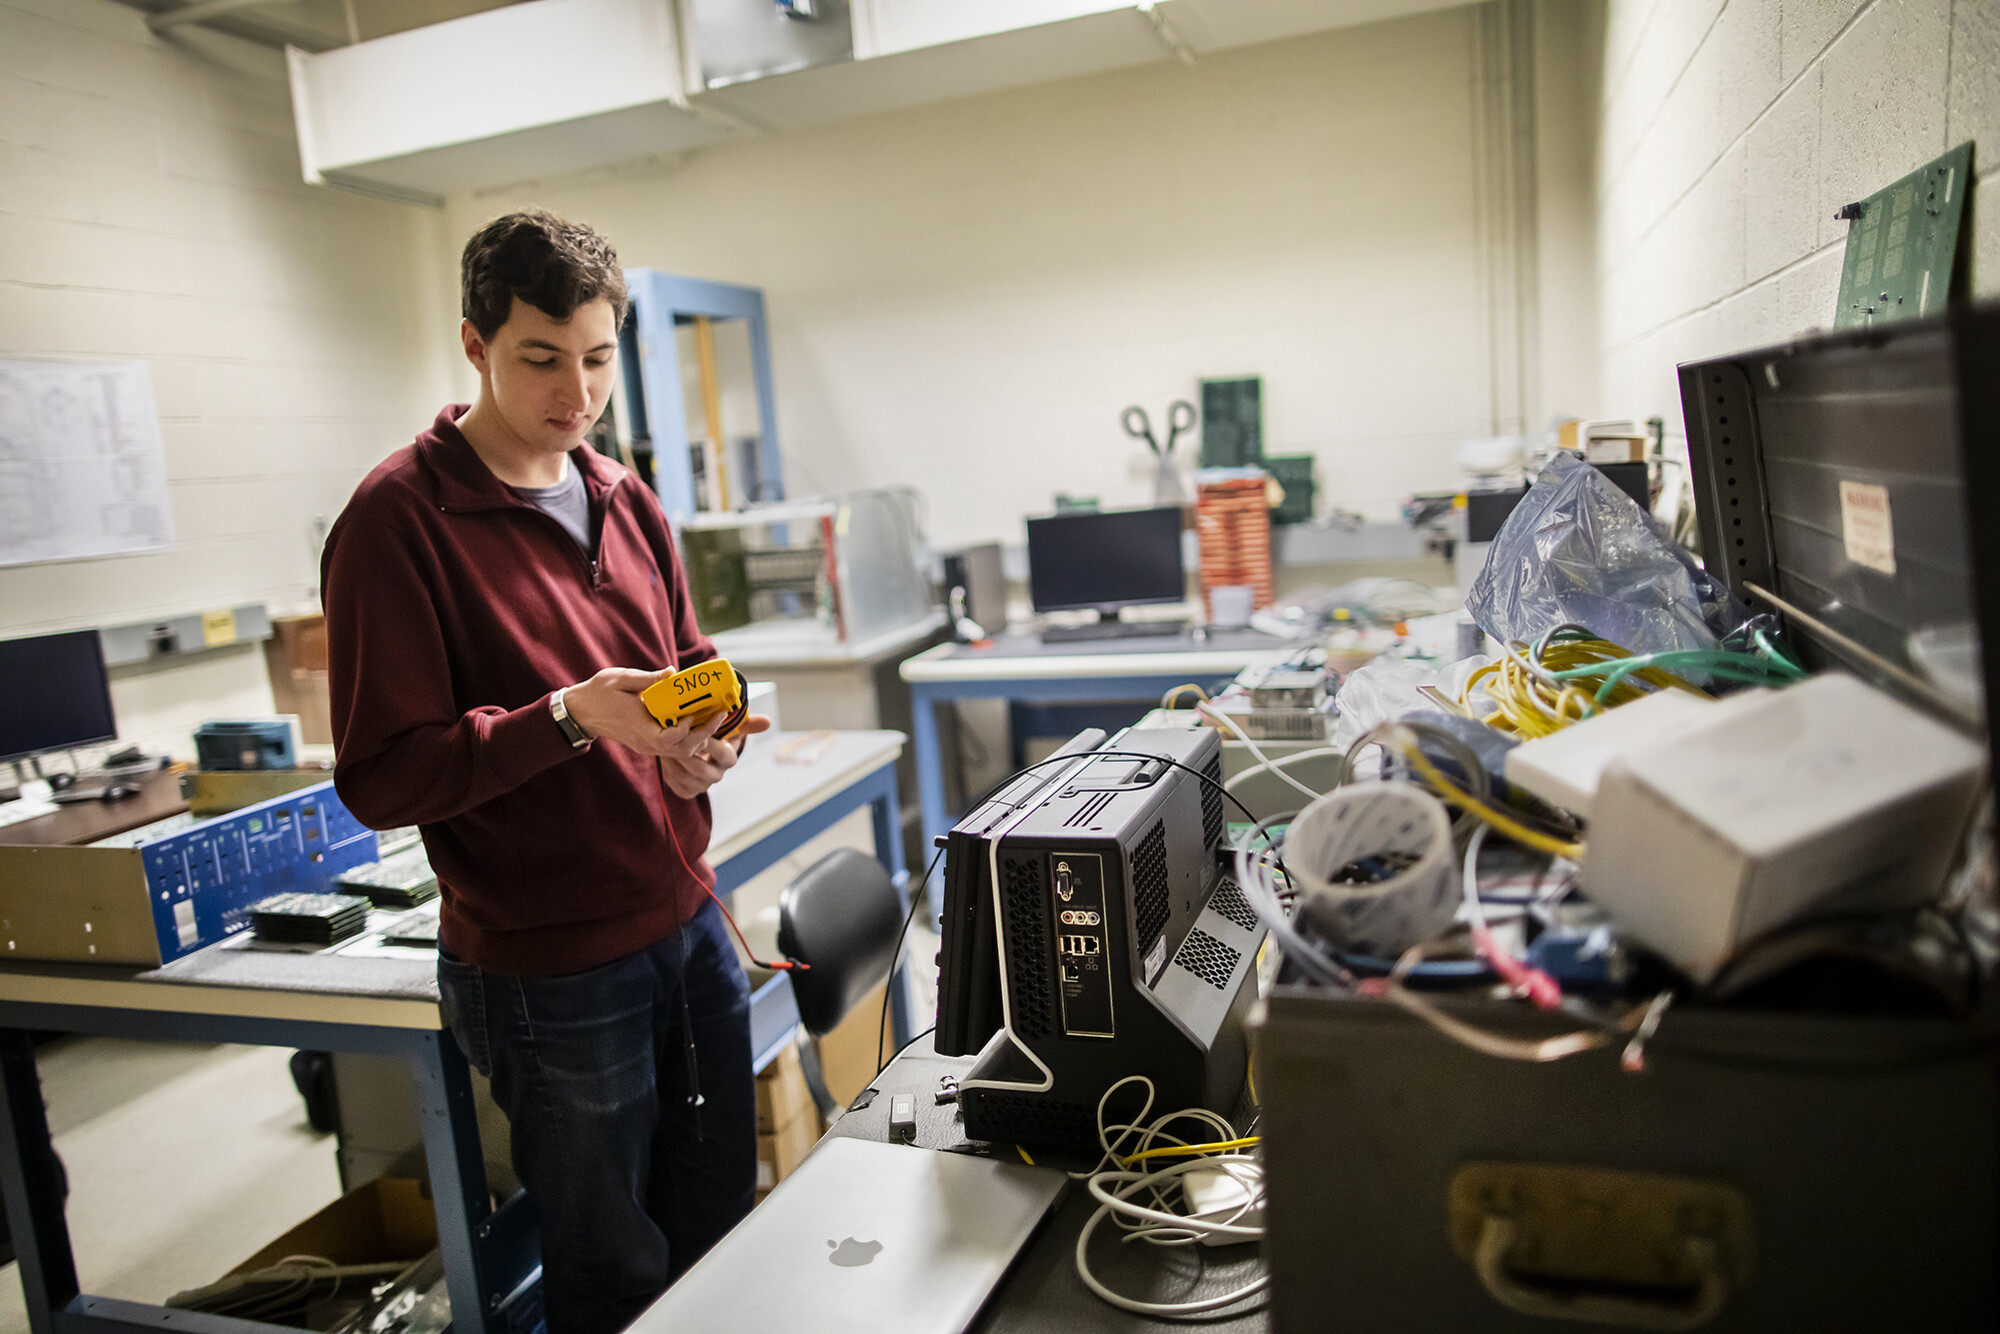 Marzec and his colleagues in the Klein lab regularly test and repair electronics for the SNO detector.